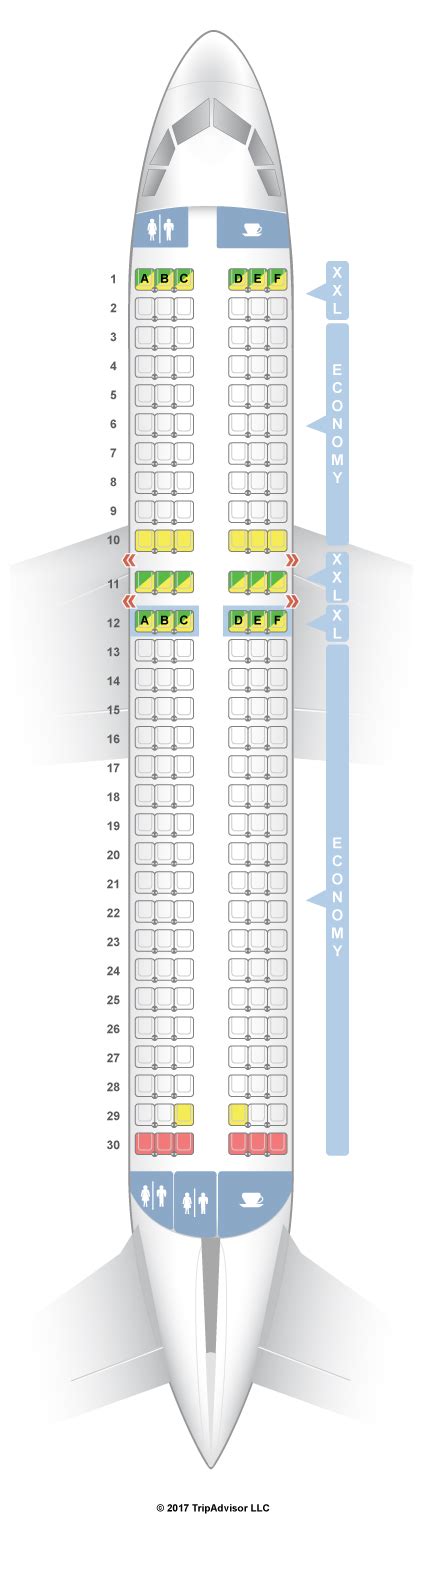 Avianca Airbus A Seating Chart My Xxx Hot Girl